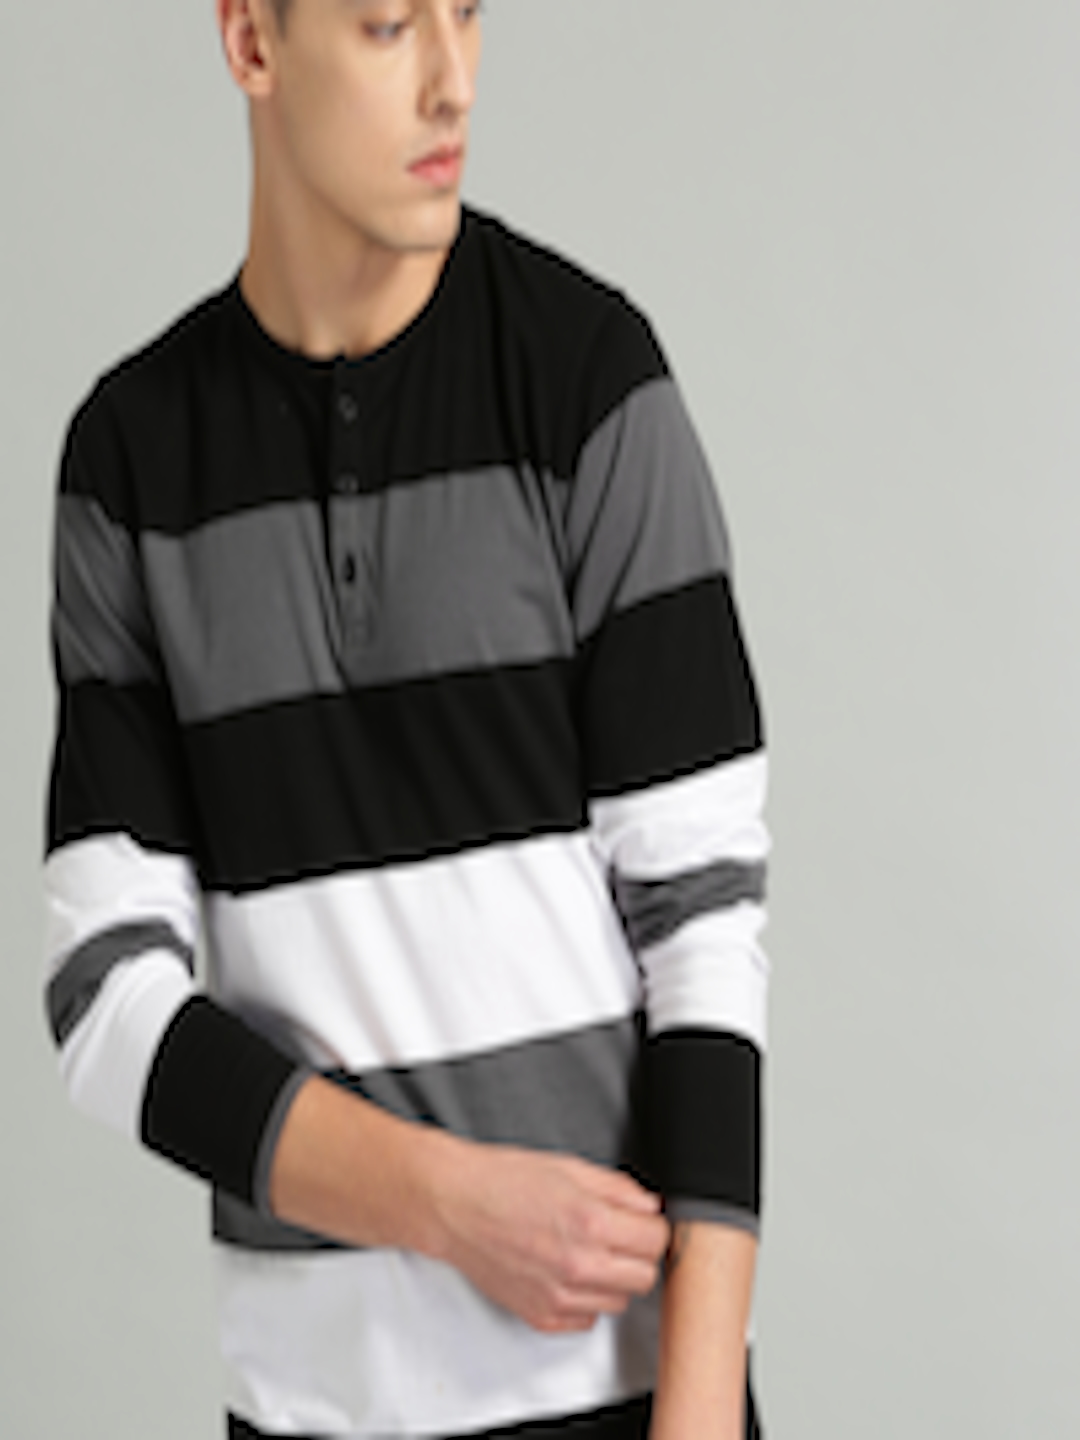 Buy The Roadster Lifestyle Co Men Black & White Colorblocked Henley ...